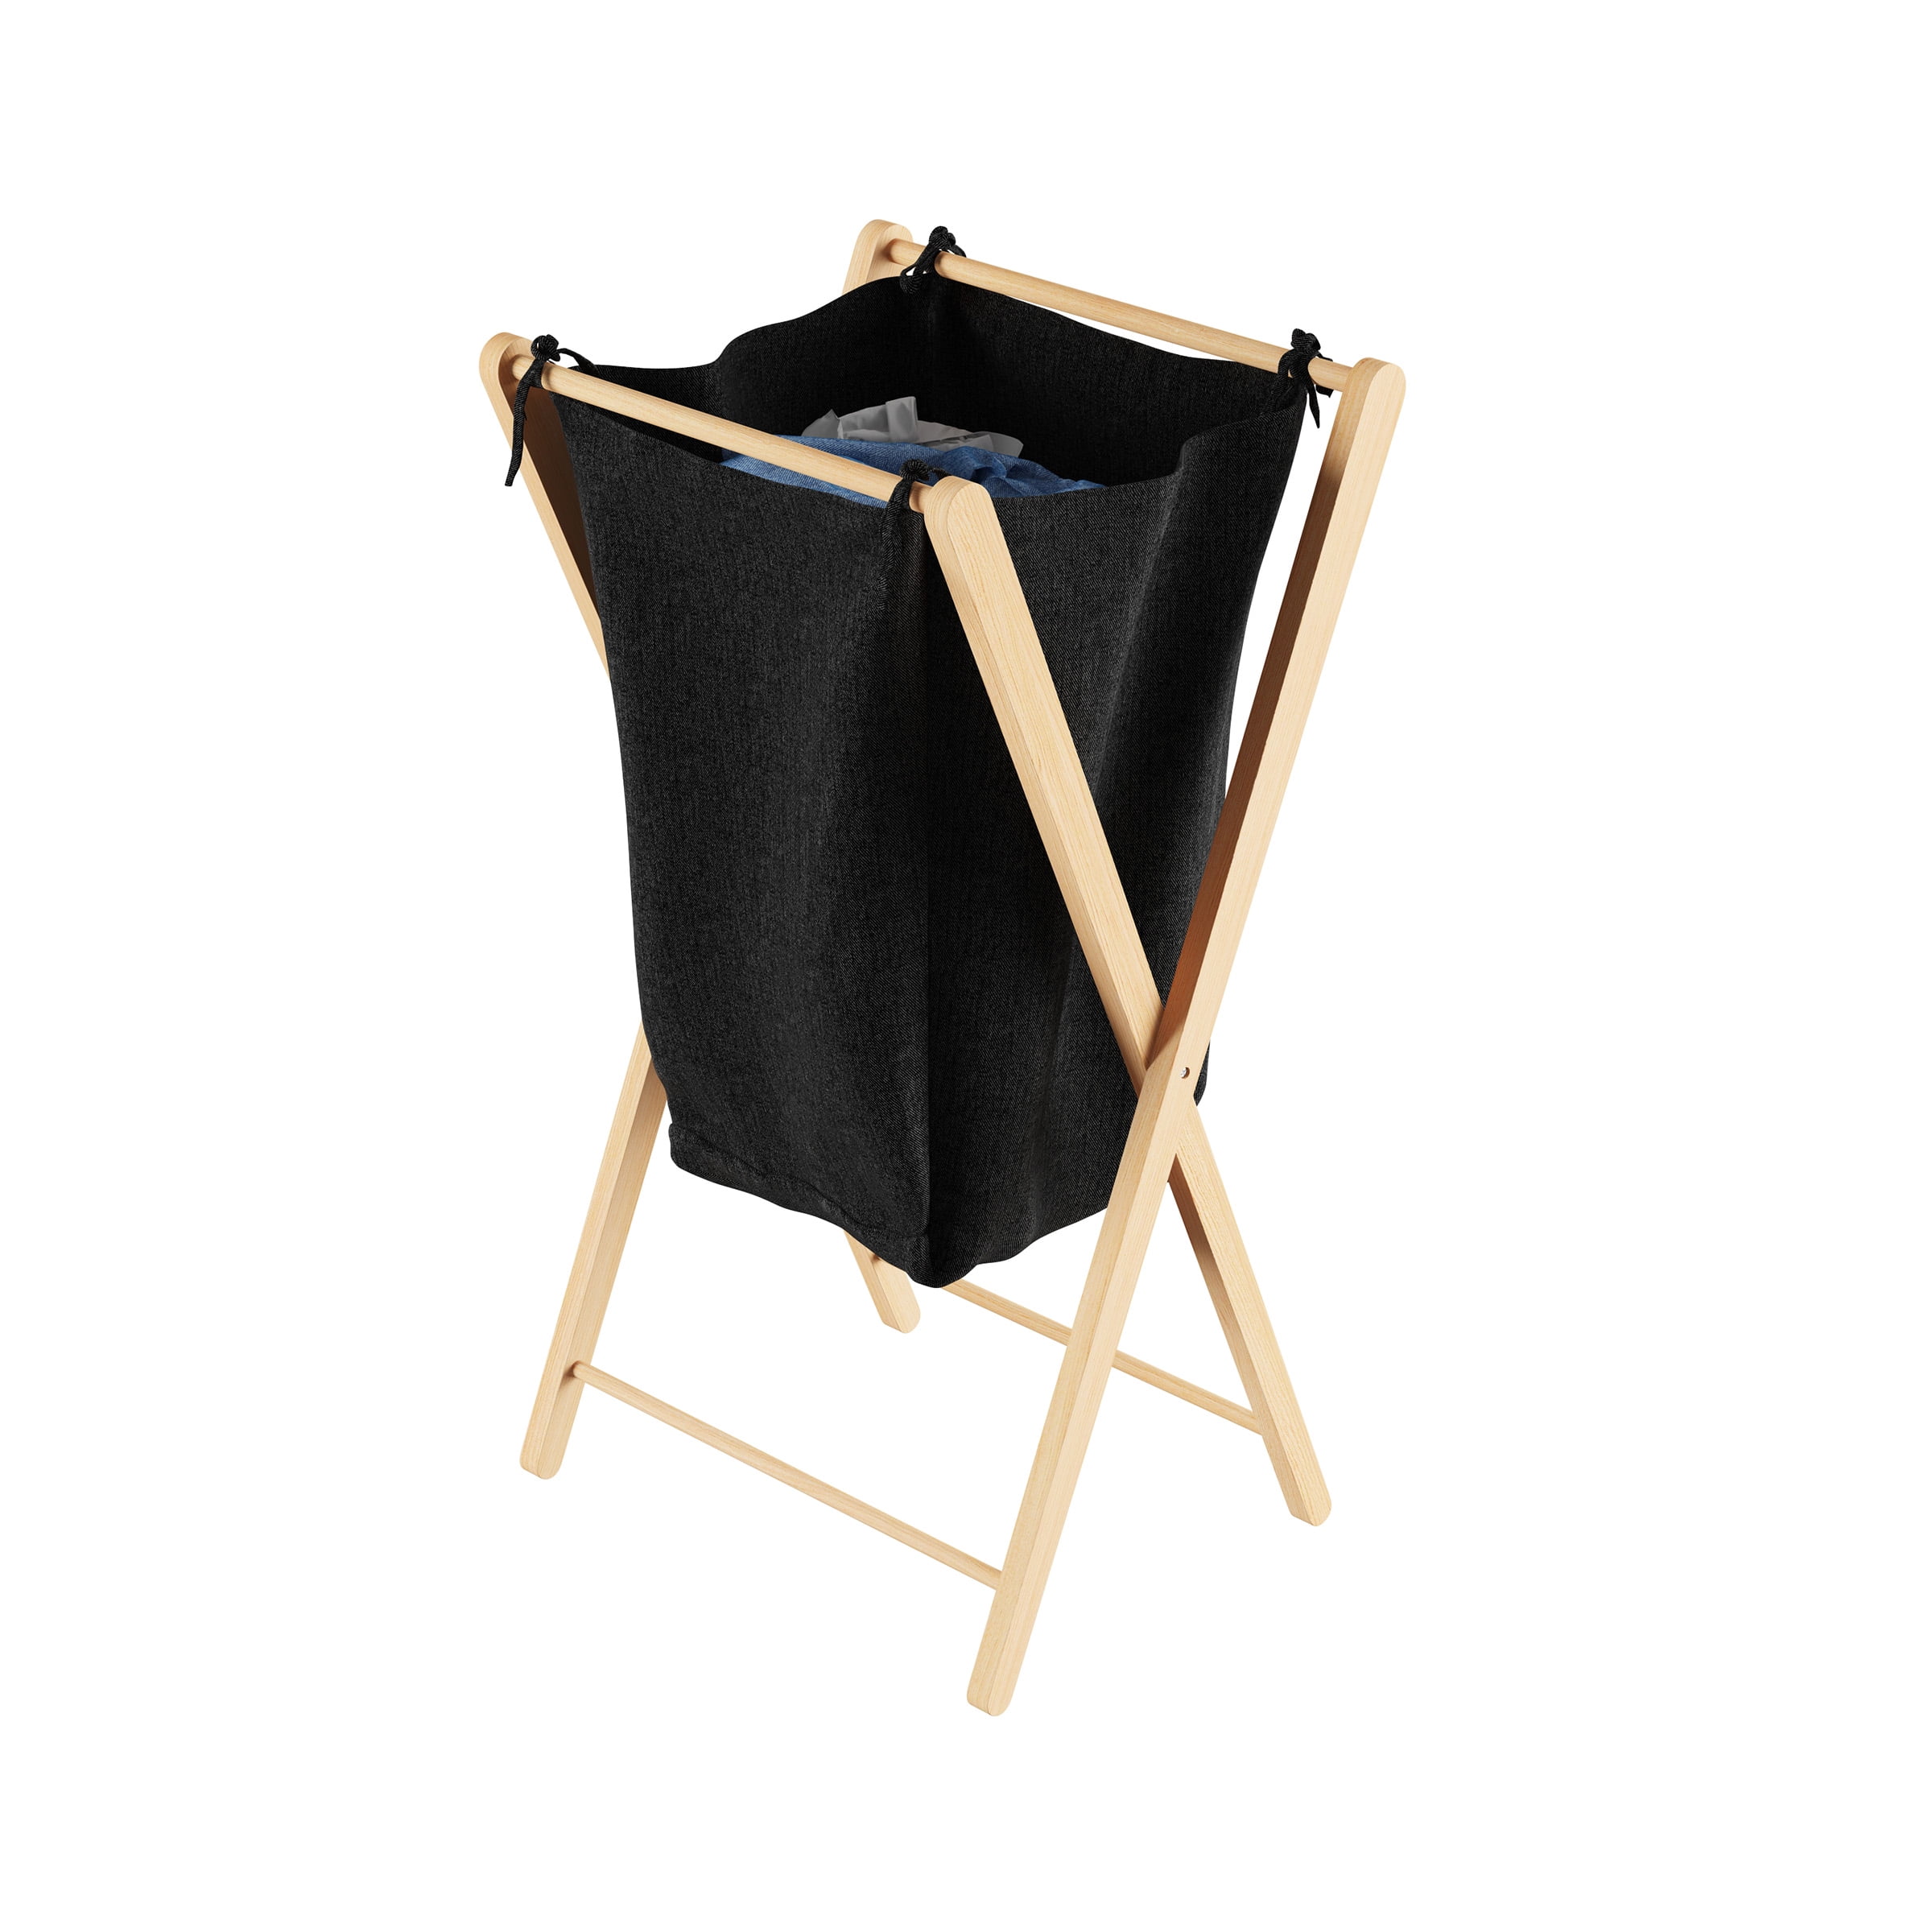 53x50 cm black Laundry bag with bamboo frame 